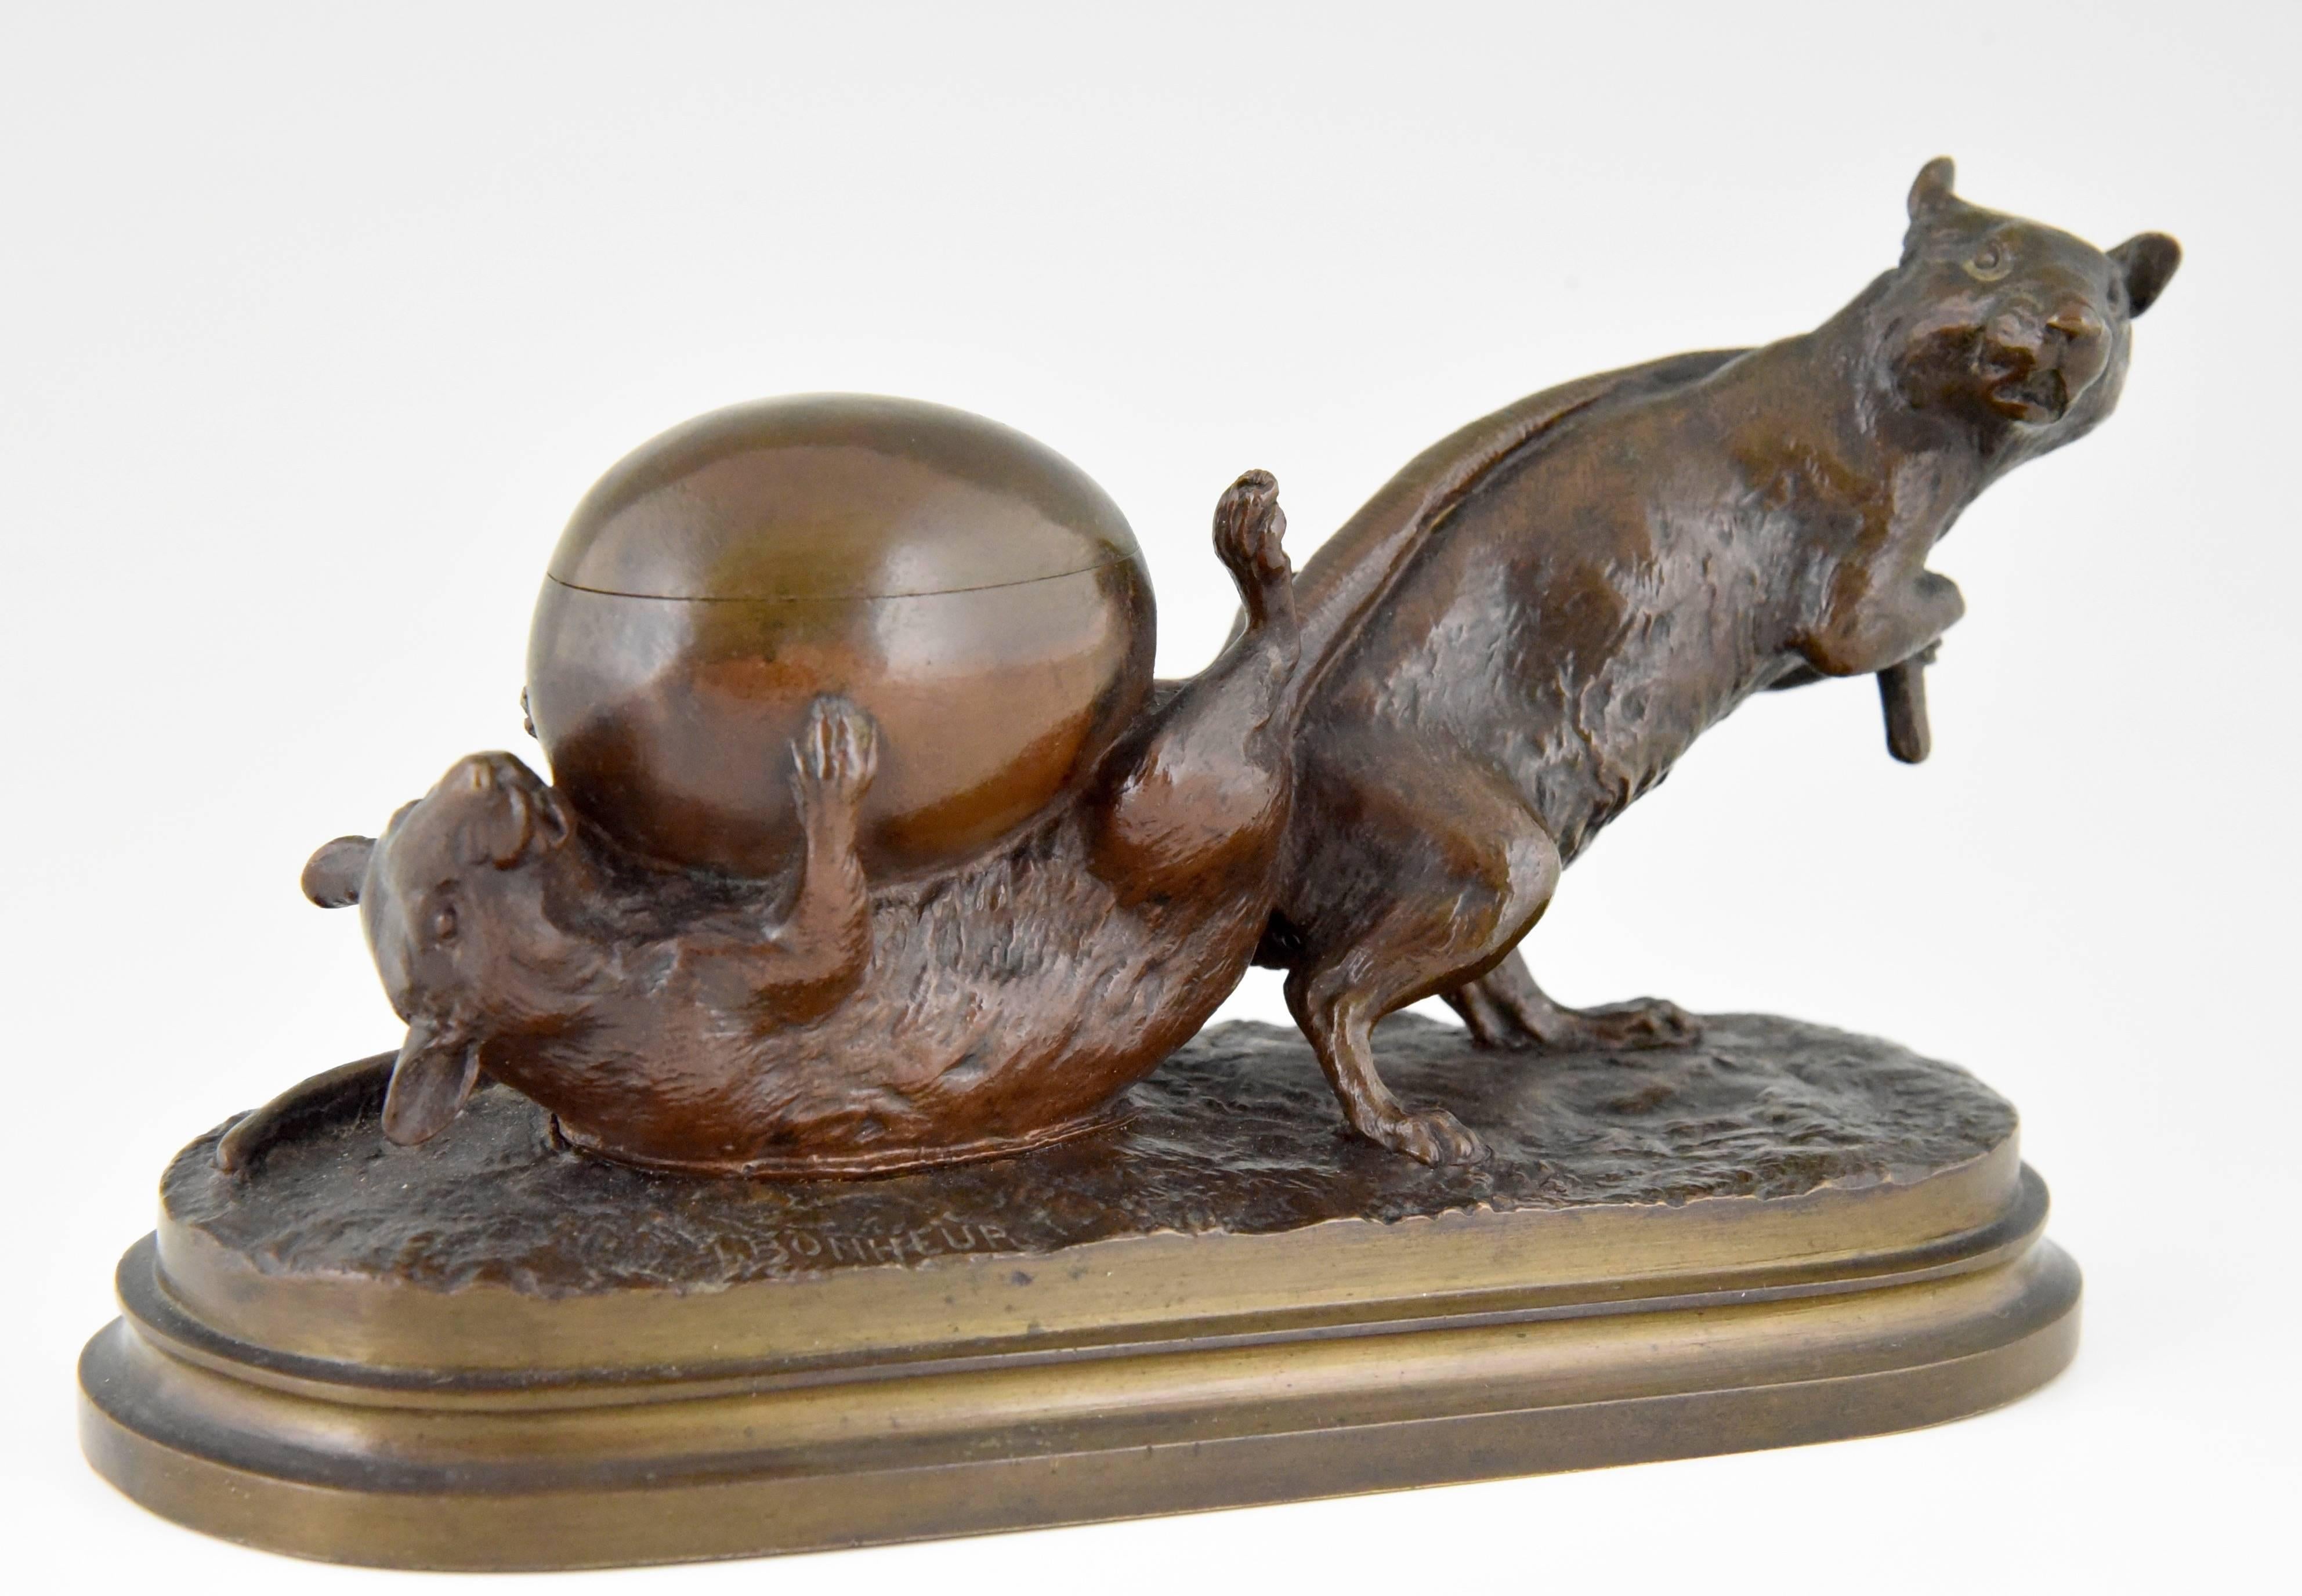 Patinated French Antique bronze sculpture of two mice & egg by Isidore Bonheur 1880